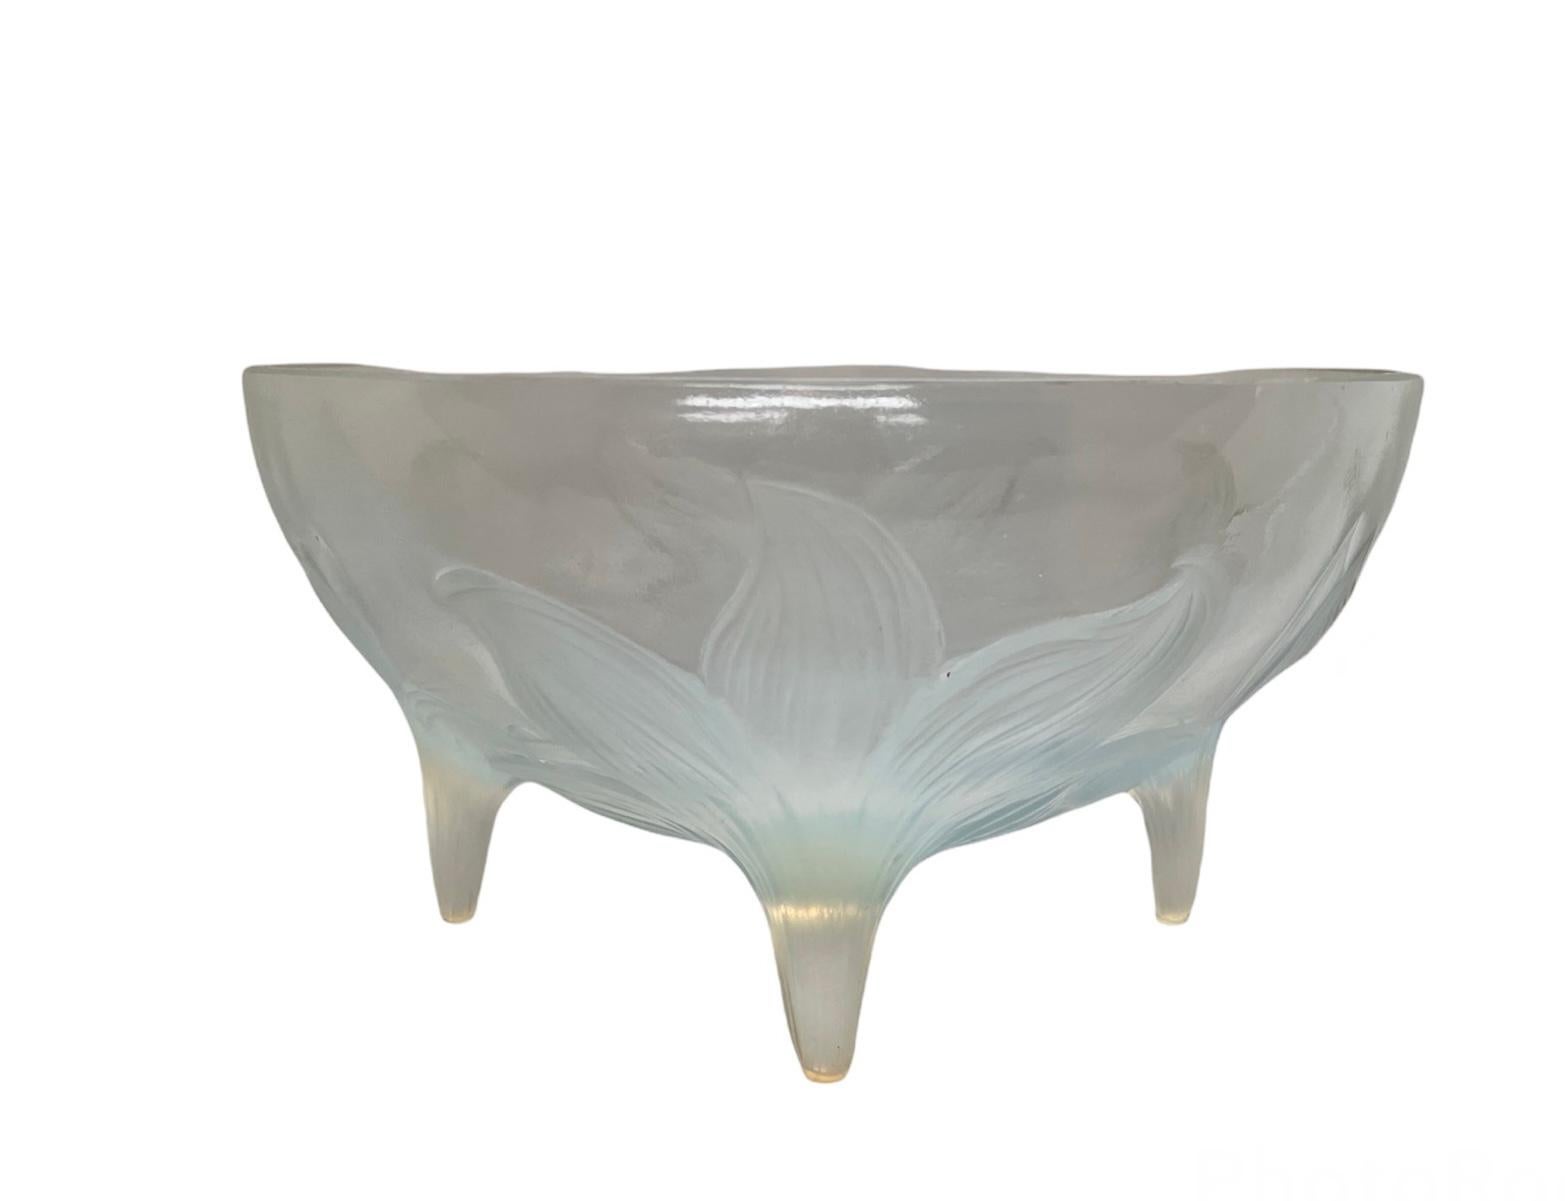 This is a R.Lalique opalescent glass footed bowl adorned with a relief of four large lilies. The R. Lalique hallmark is incised at the bottom.